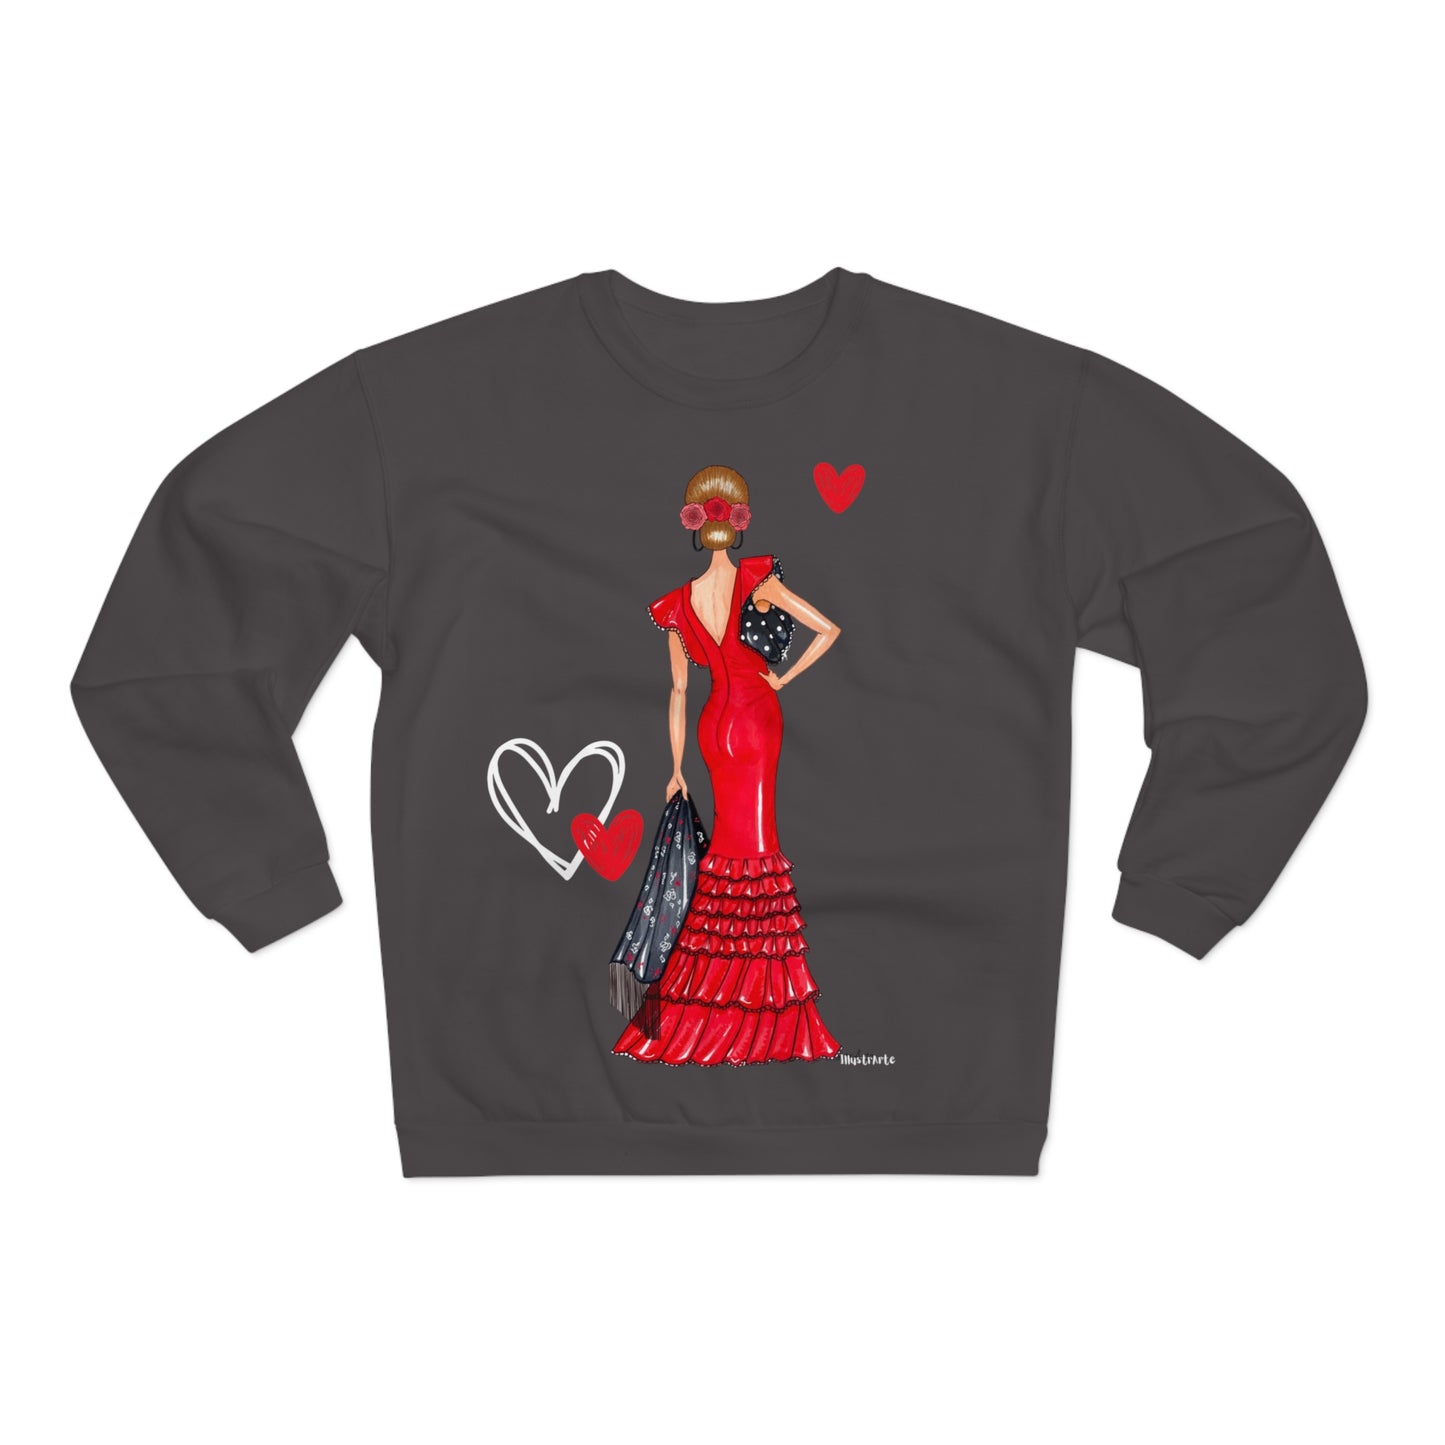 a women's sweatshirt with a woman in a red dress